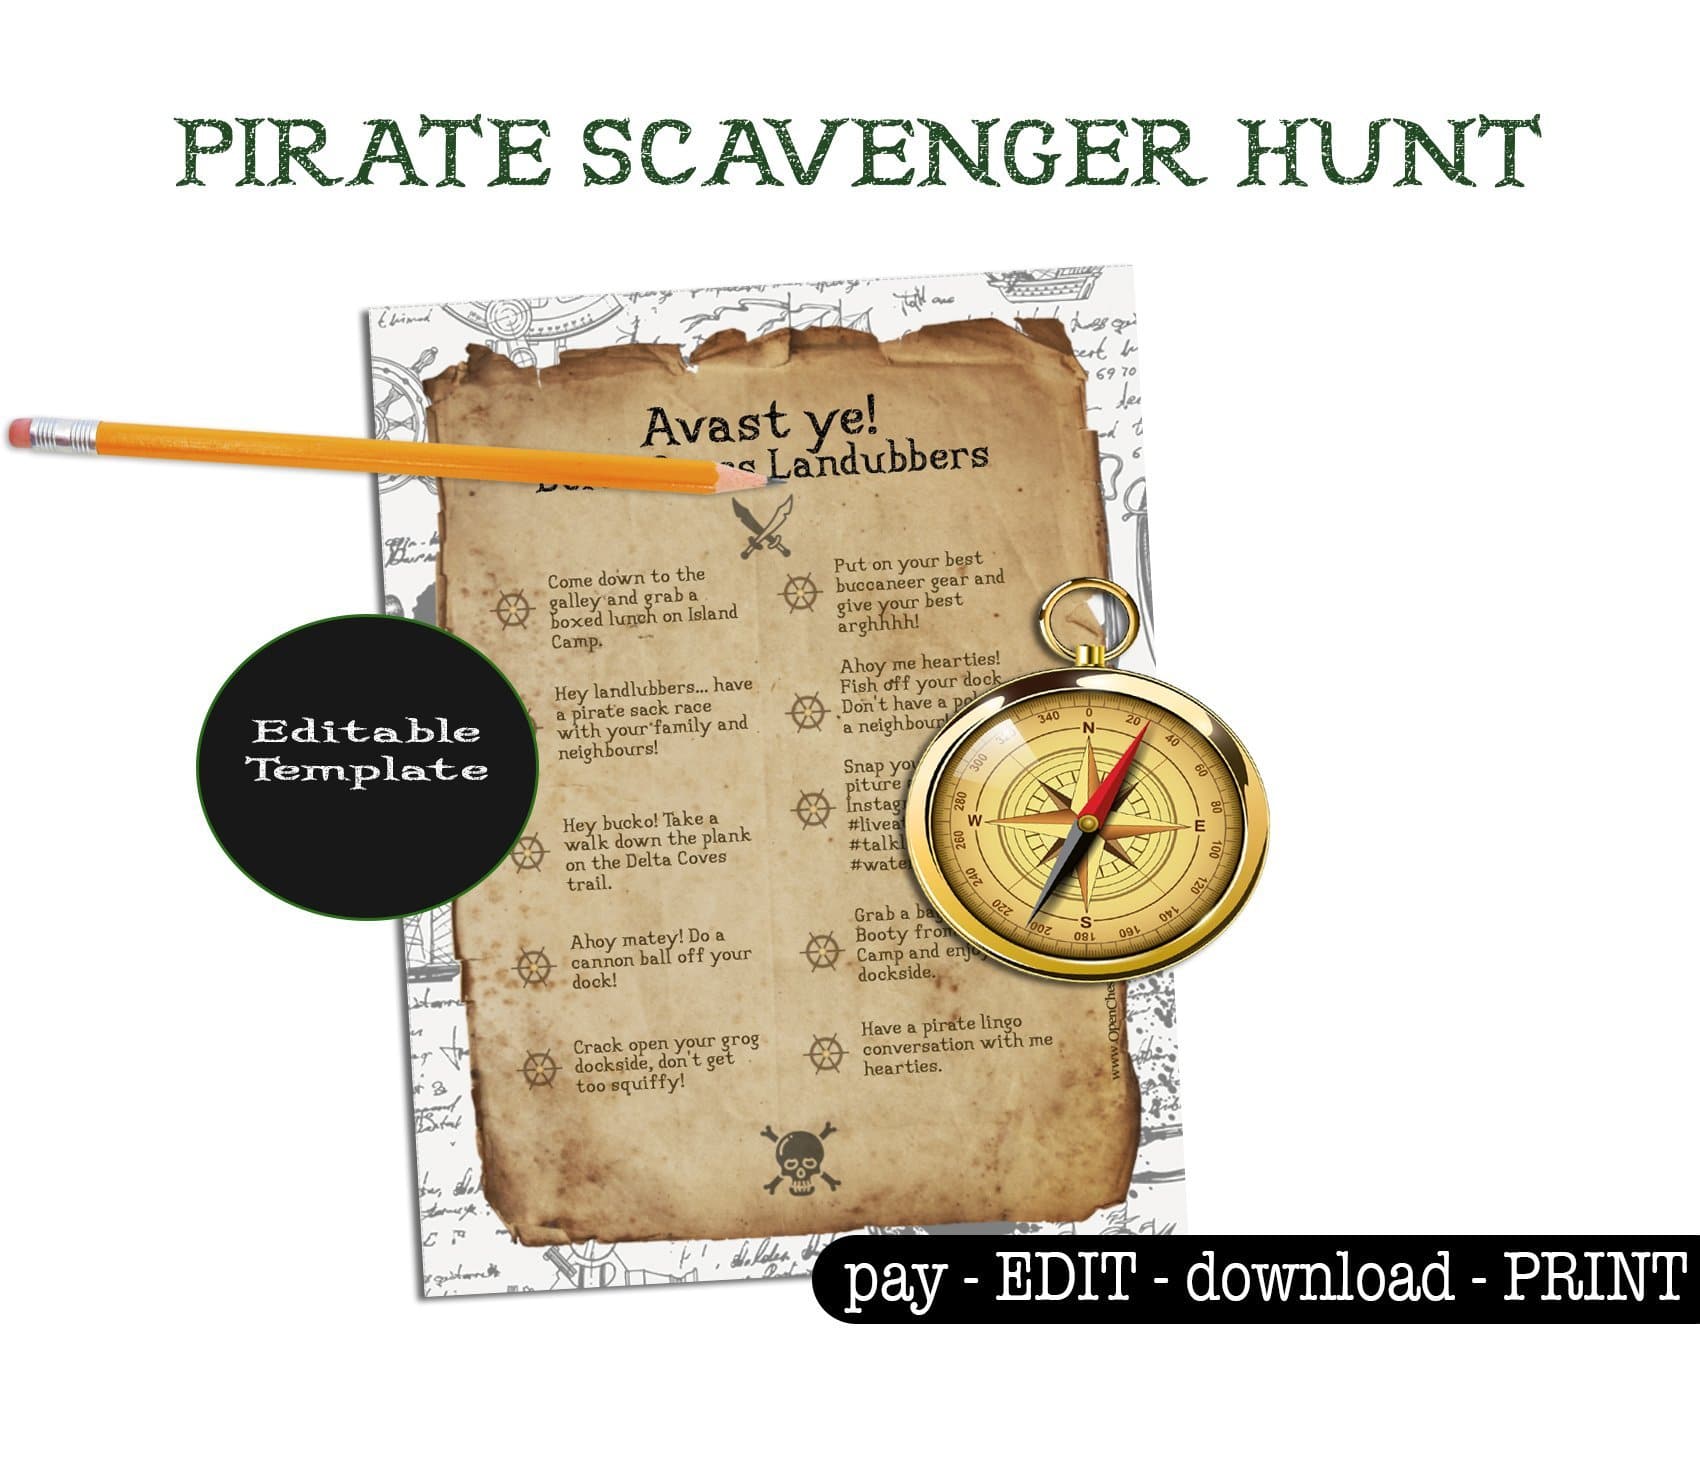 Pirate Scavenger Hunt - Open Chests